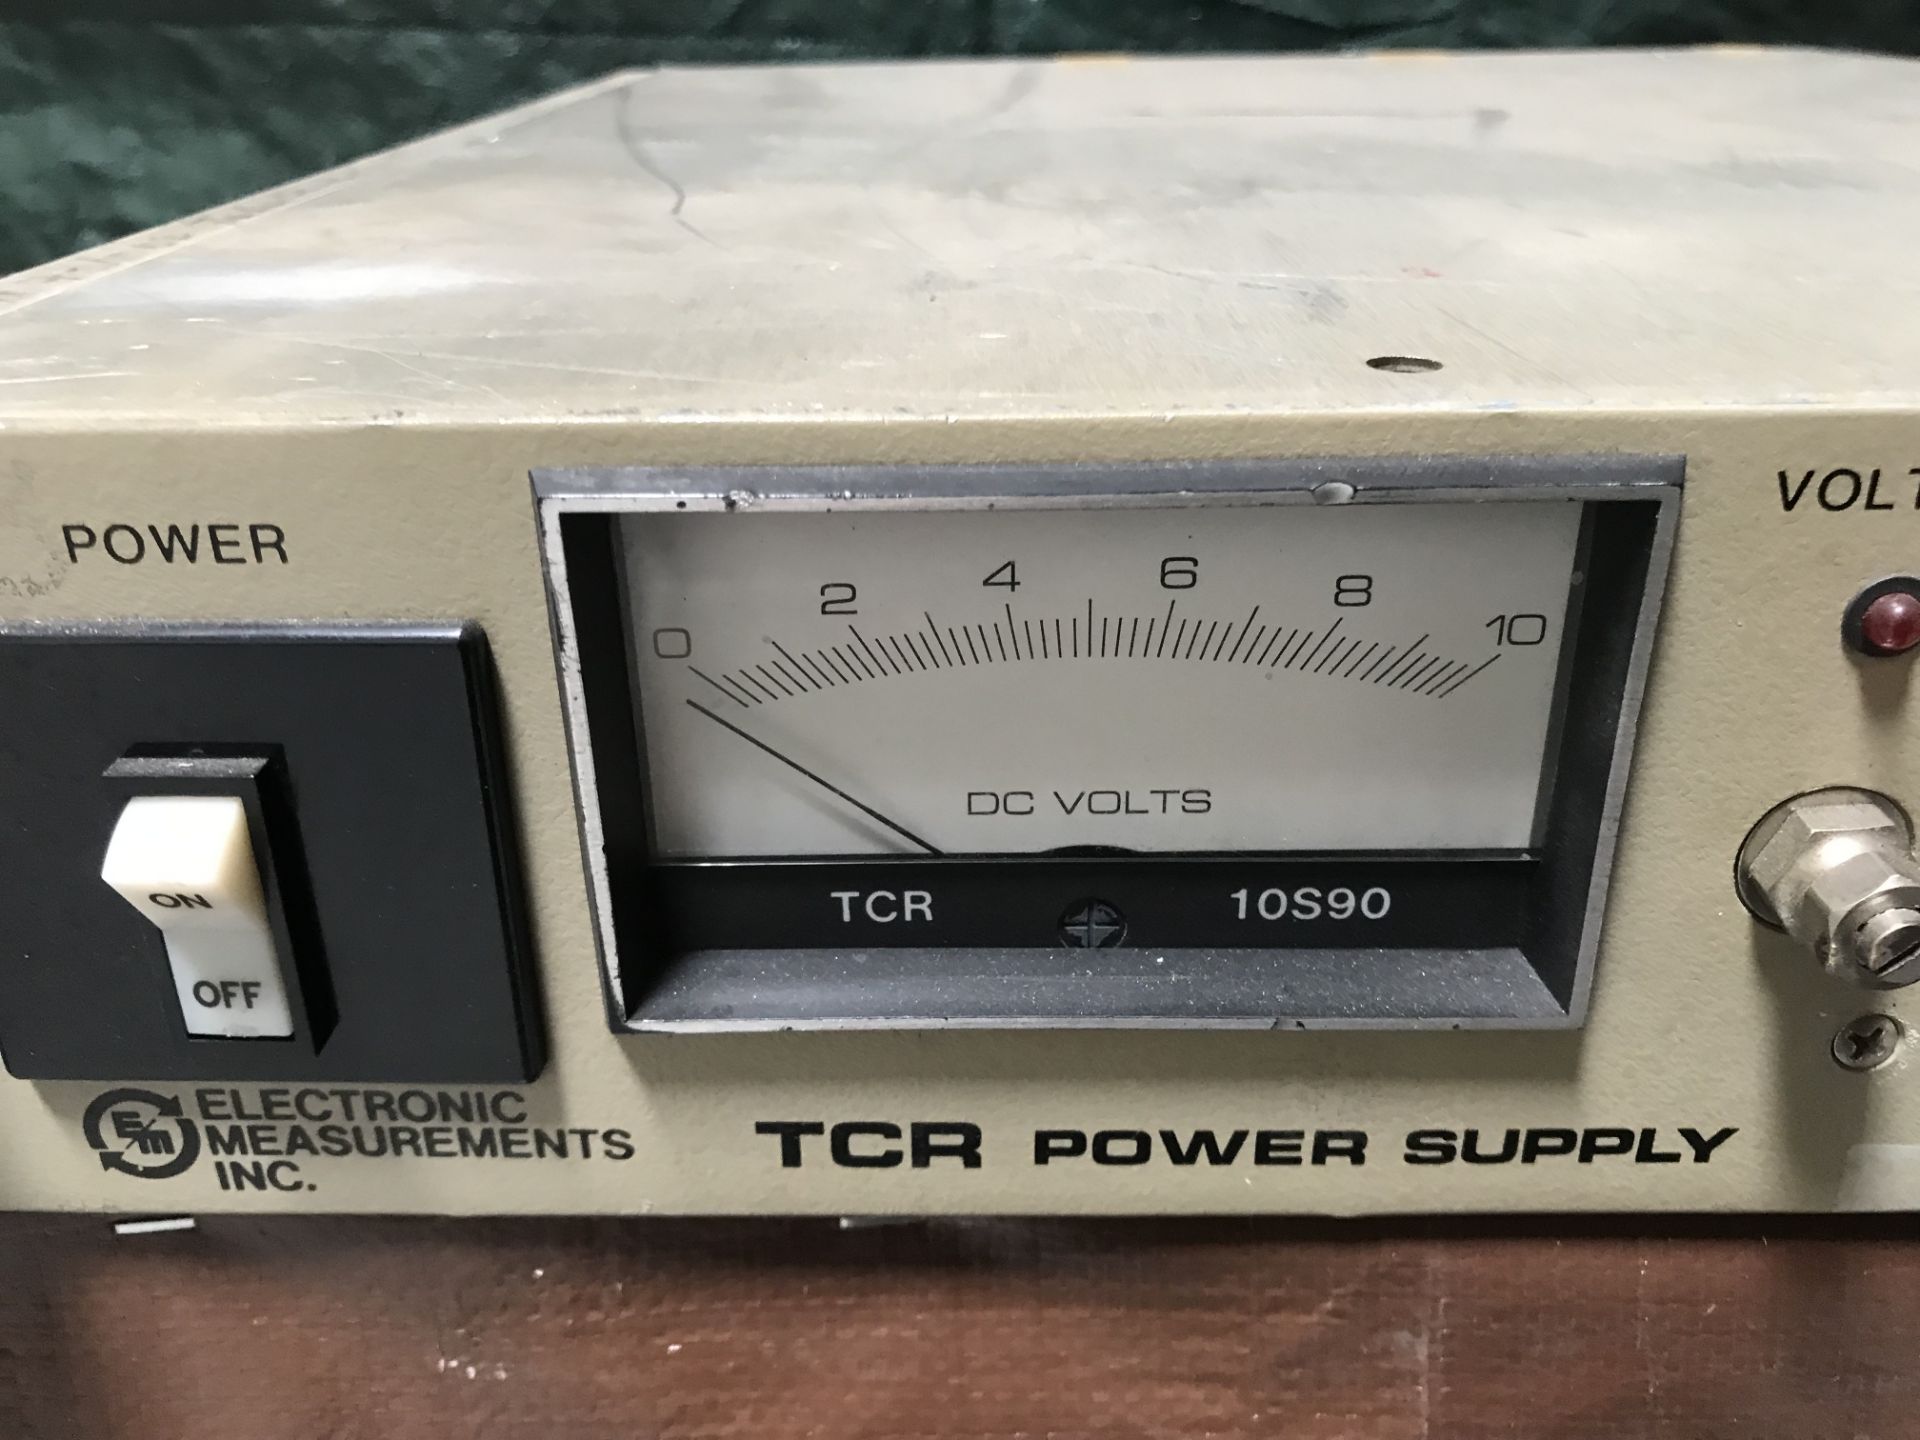 #078 Elctronic Measurments, Inc. TCR 10S90-2-0480-0V-LB, SN: 87F-9676, Input: 190-250VRMS 50/60Hz, O - Image 2 of 8